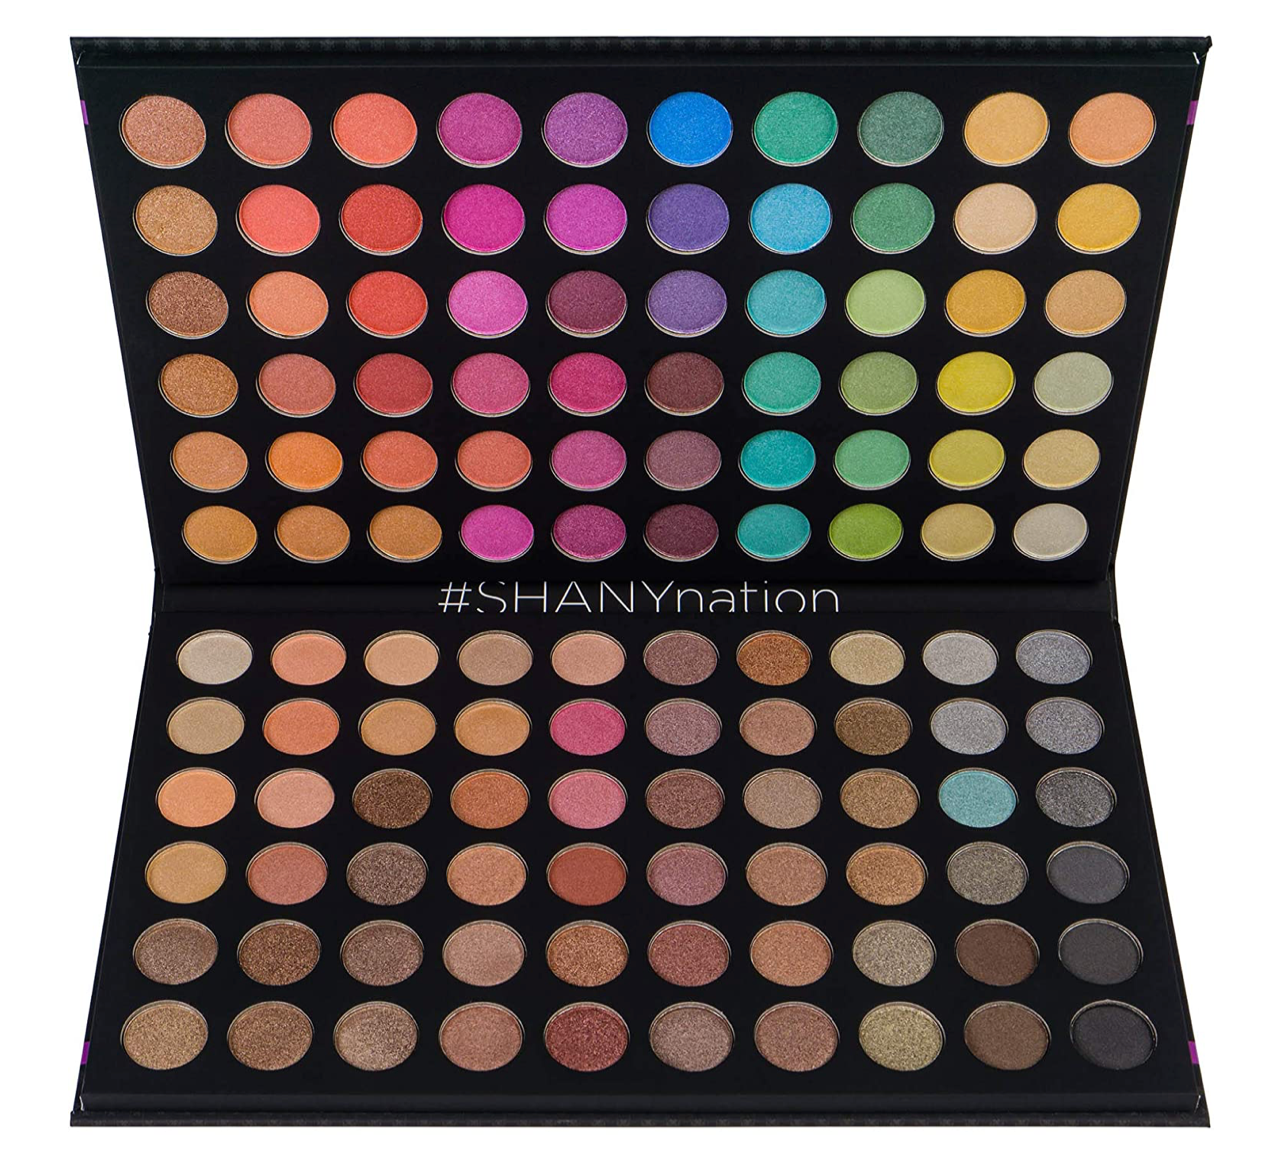 Large 120 Color Eye Shadow Palette - Nudes and Neons